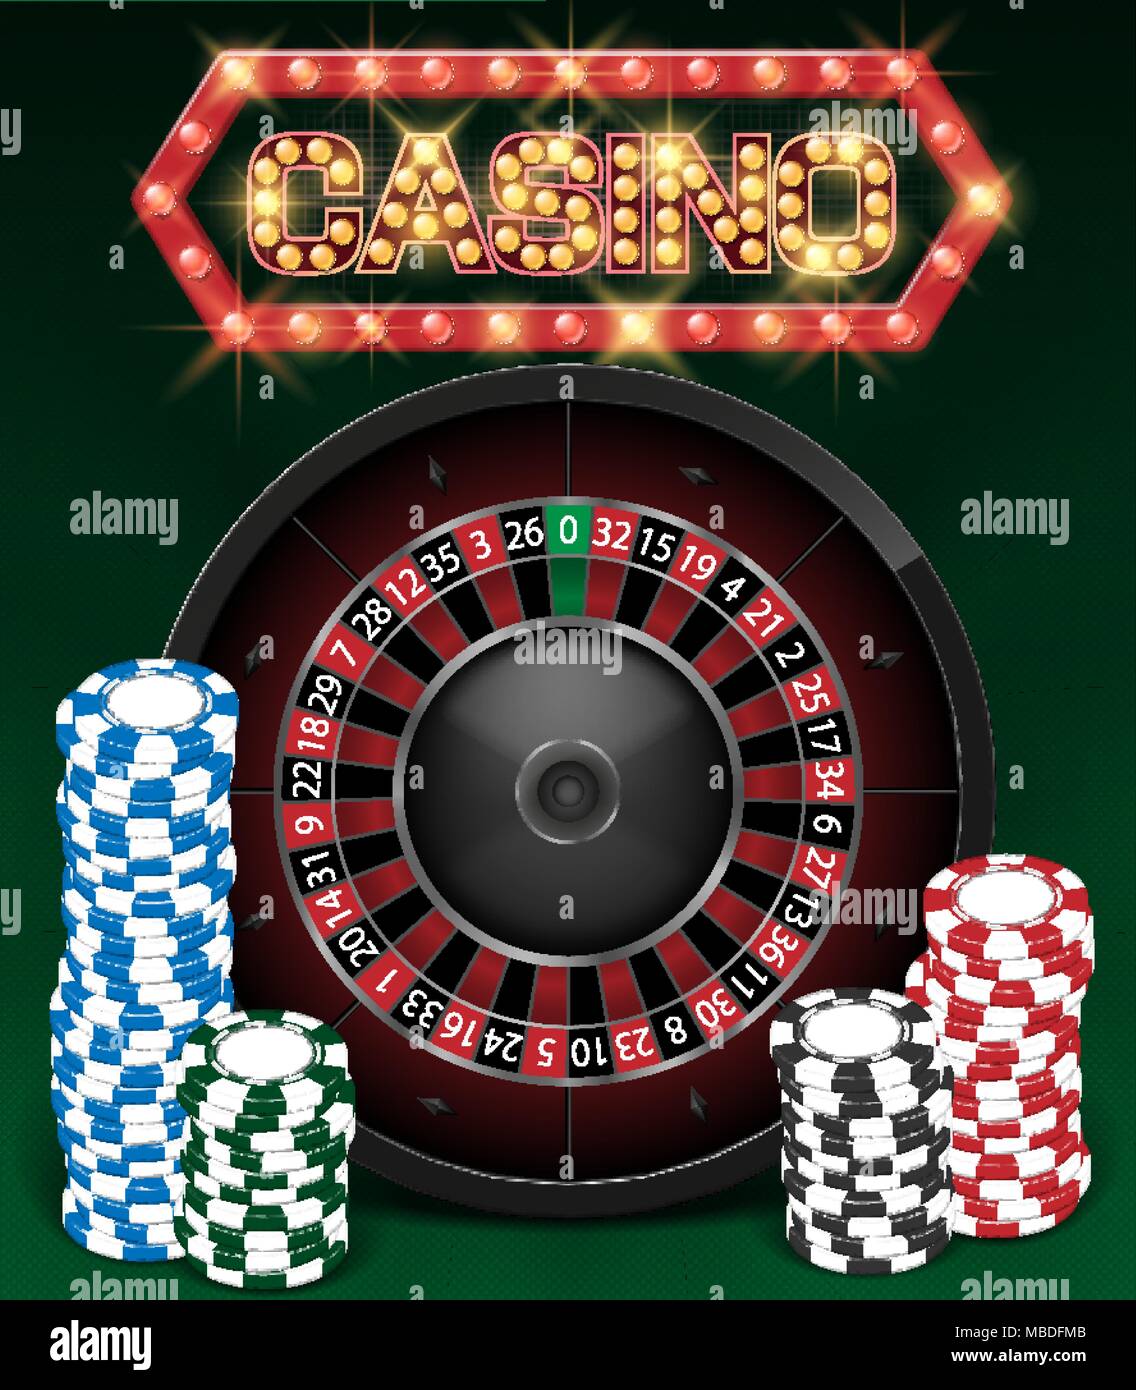 Casino Gambling background design with realistic Roulette Wheel and Casino Chips. Roulette table isolated on green background. Vector illustration. Stock Vector